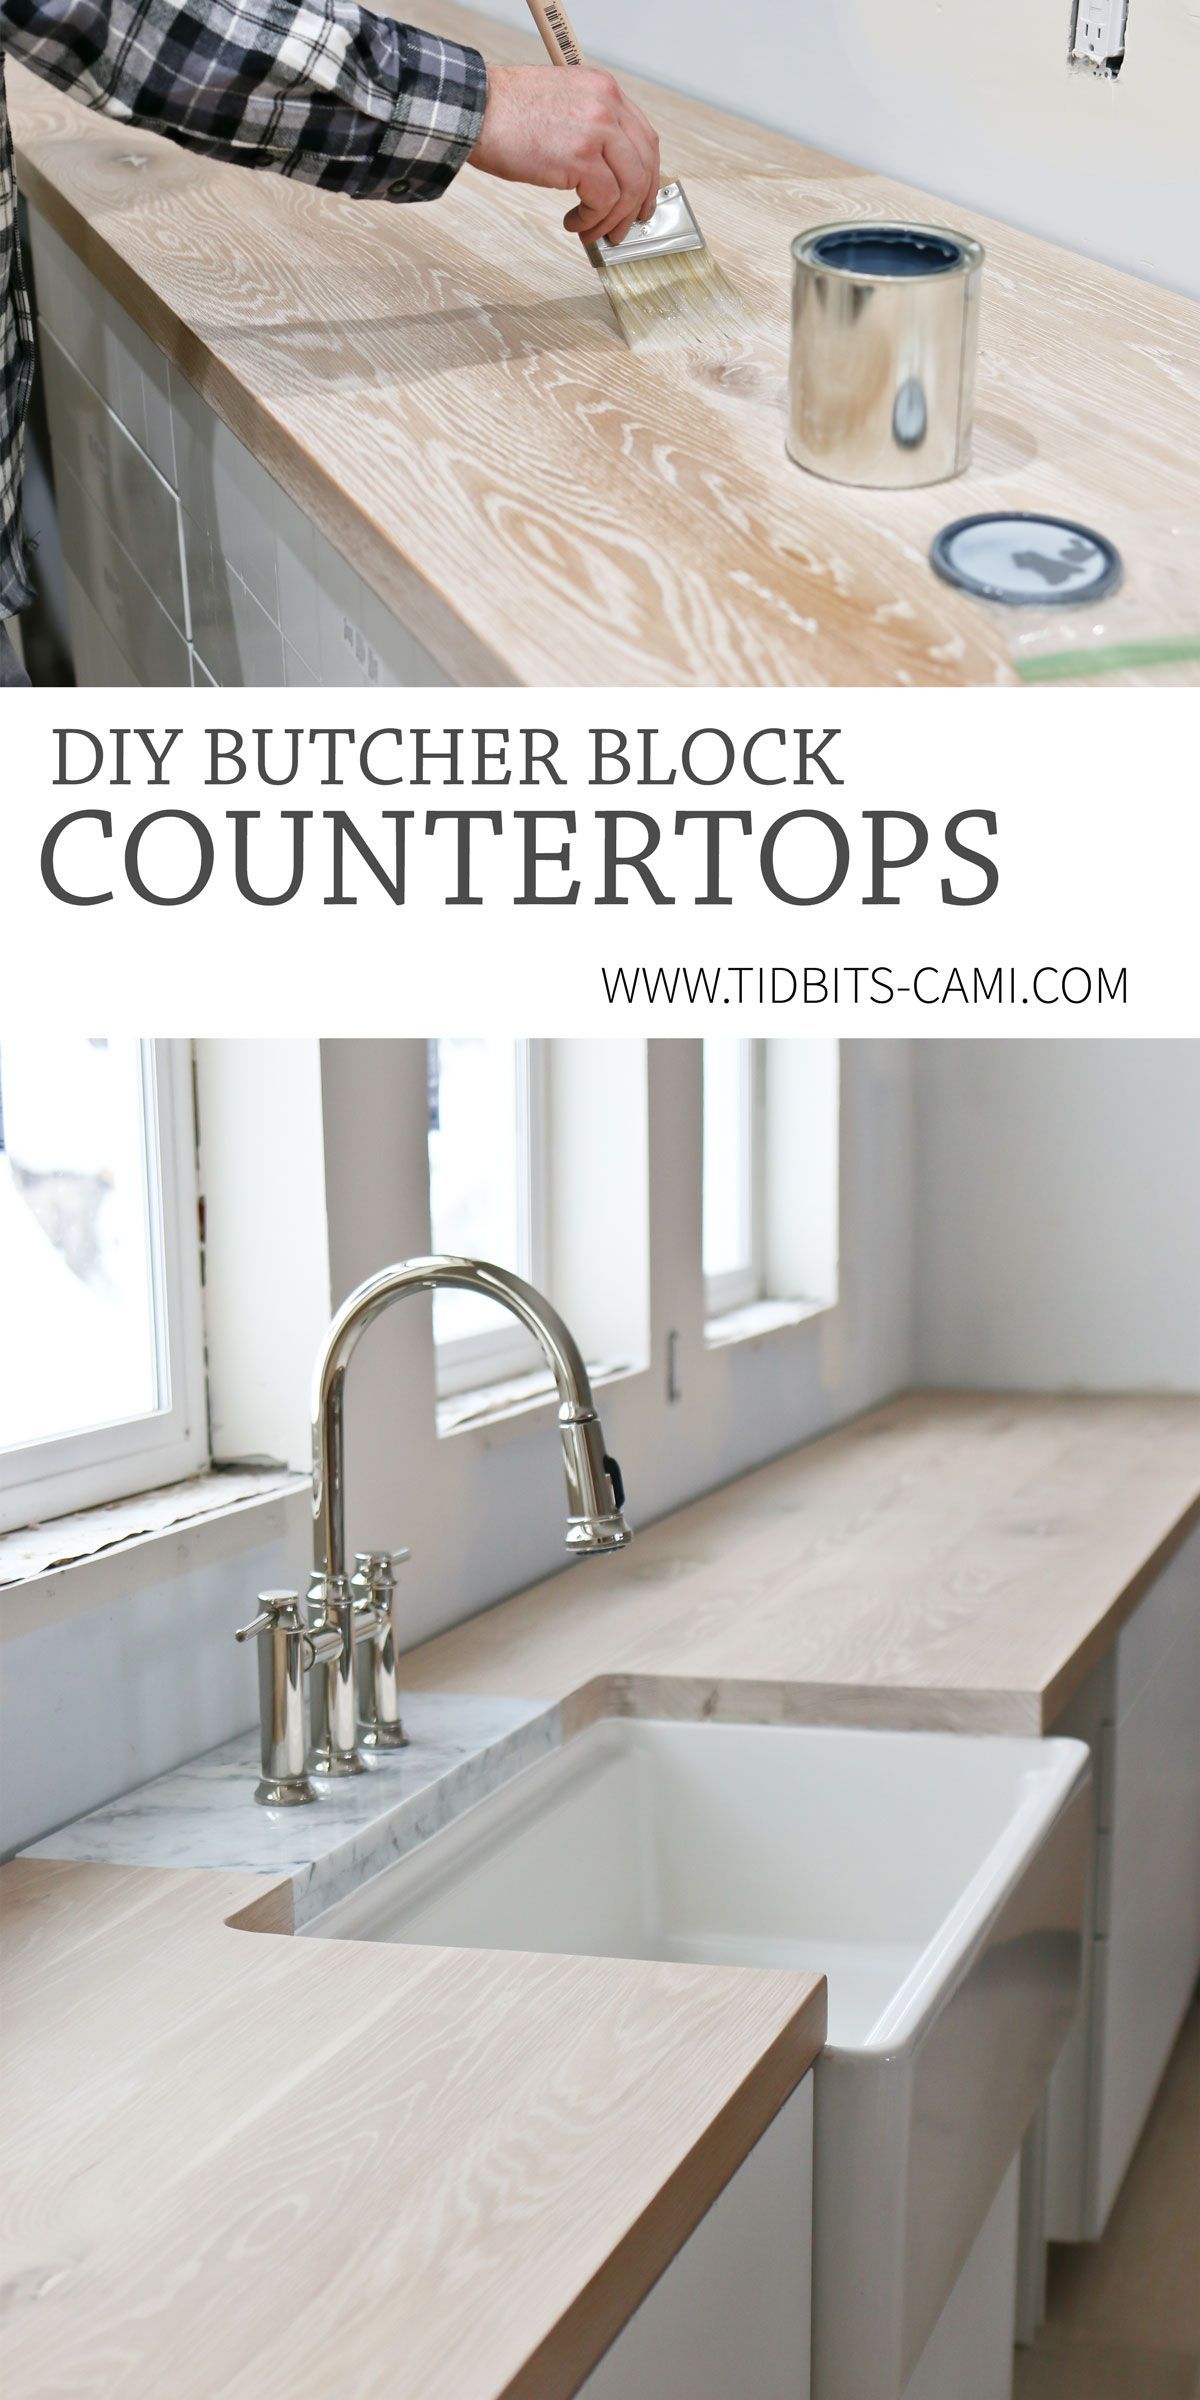 DIY Butcher Block Countertops | Oh, yes you can! - Tidbits - DIY Butcher Block Countertops | Oh, yes you can! - Tidbits -   19 diy Decorations kitchen ideas